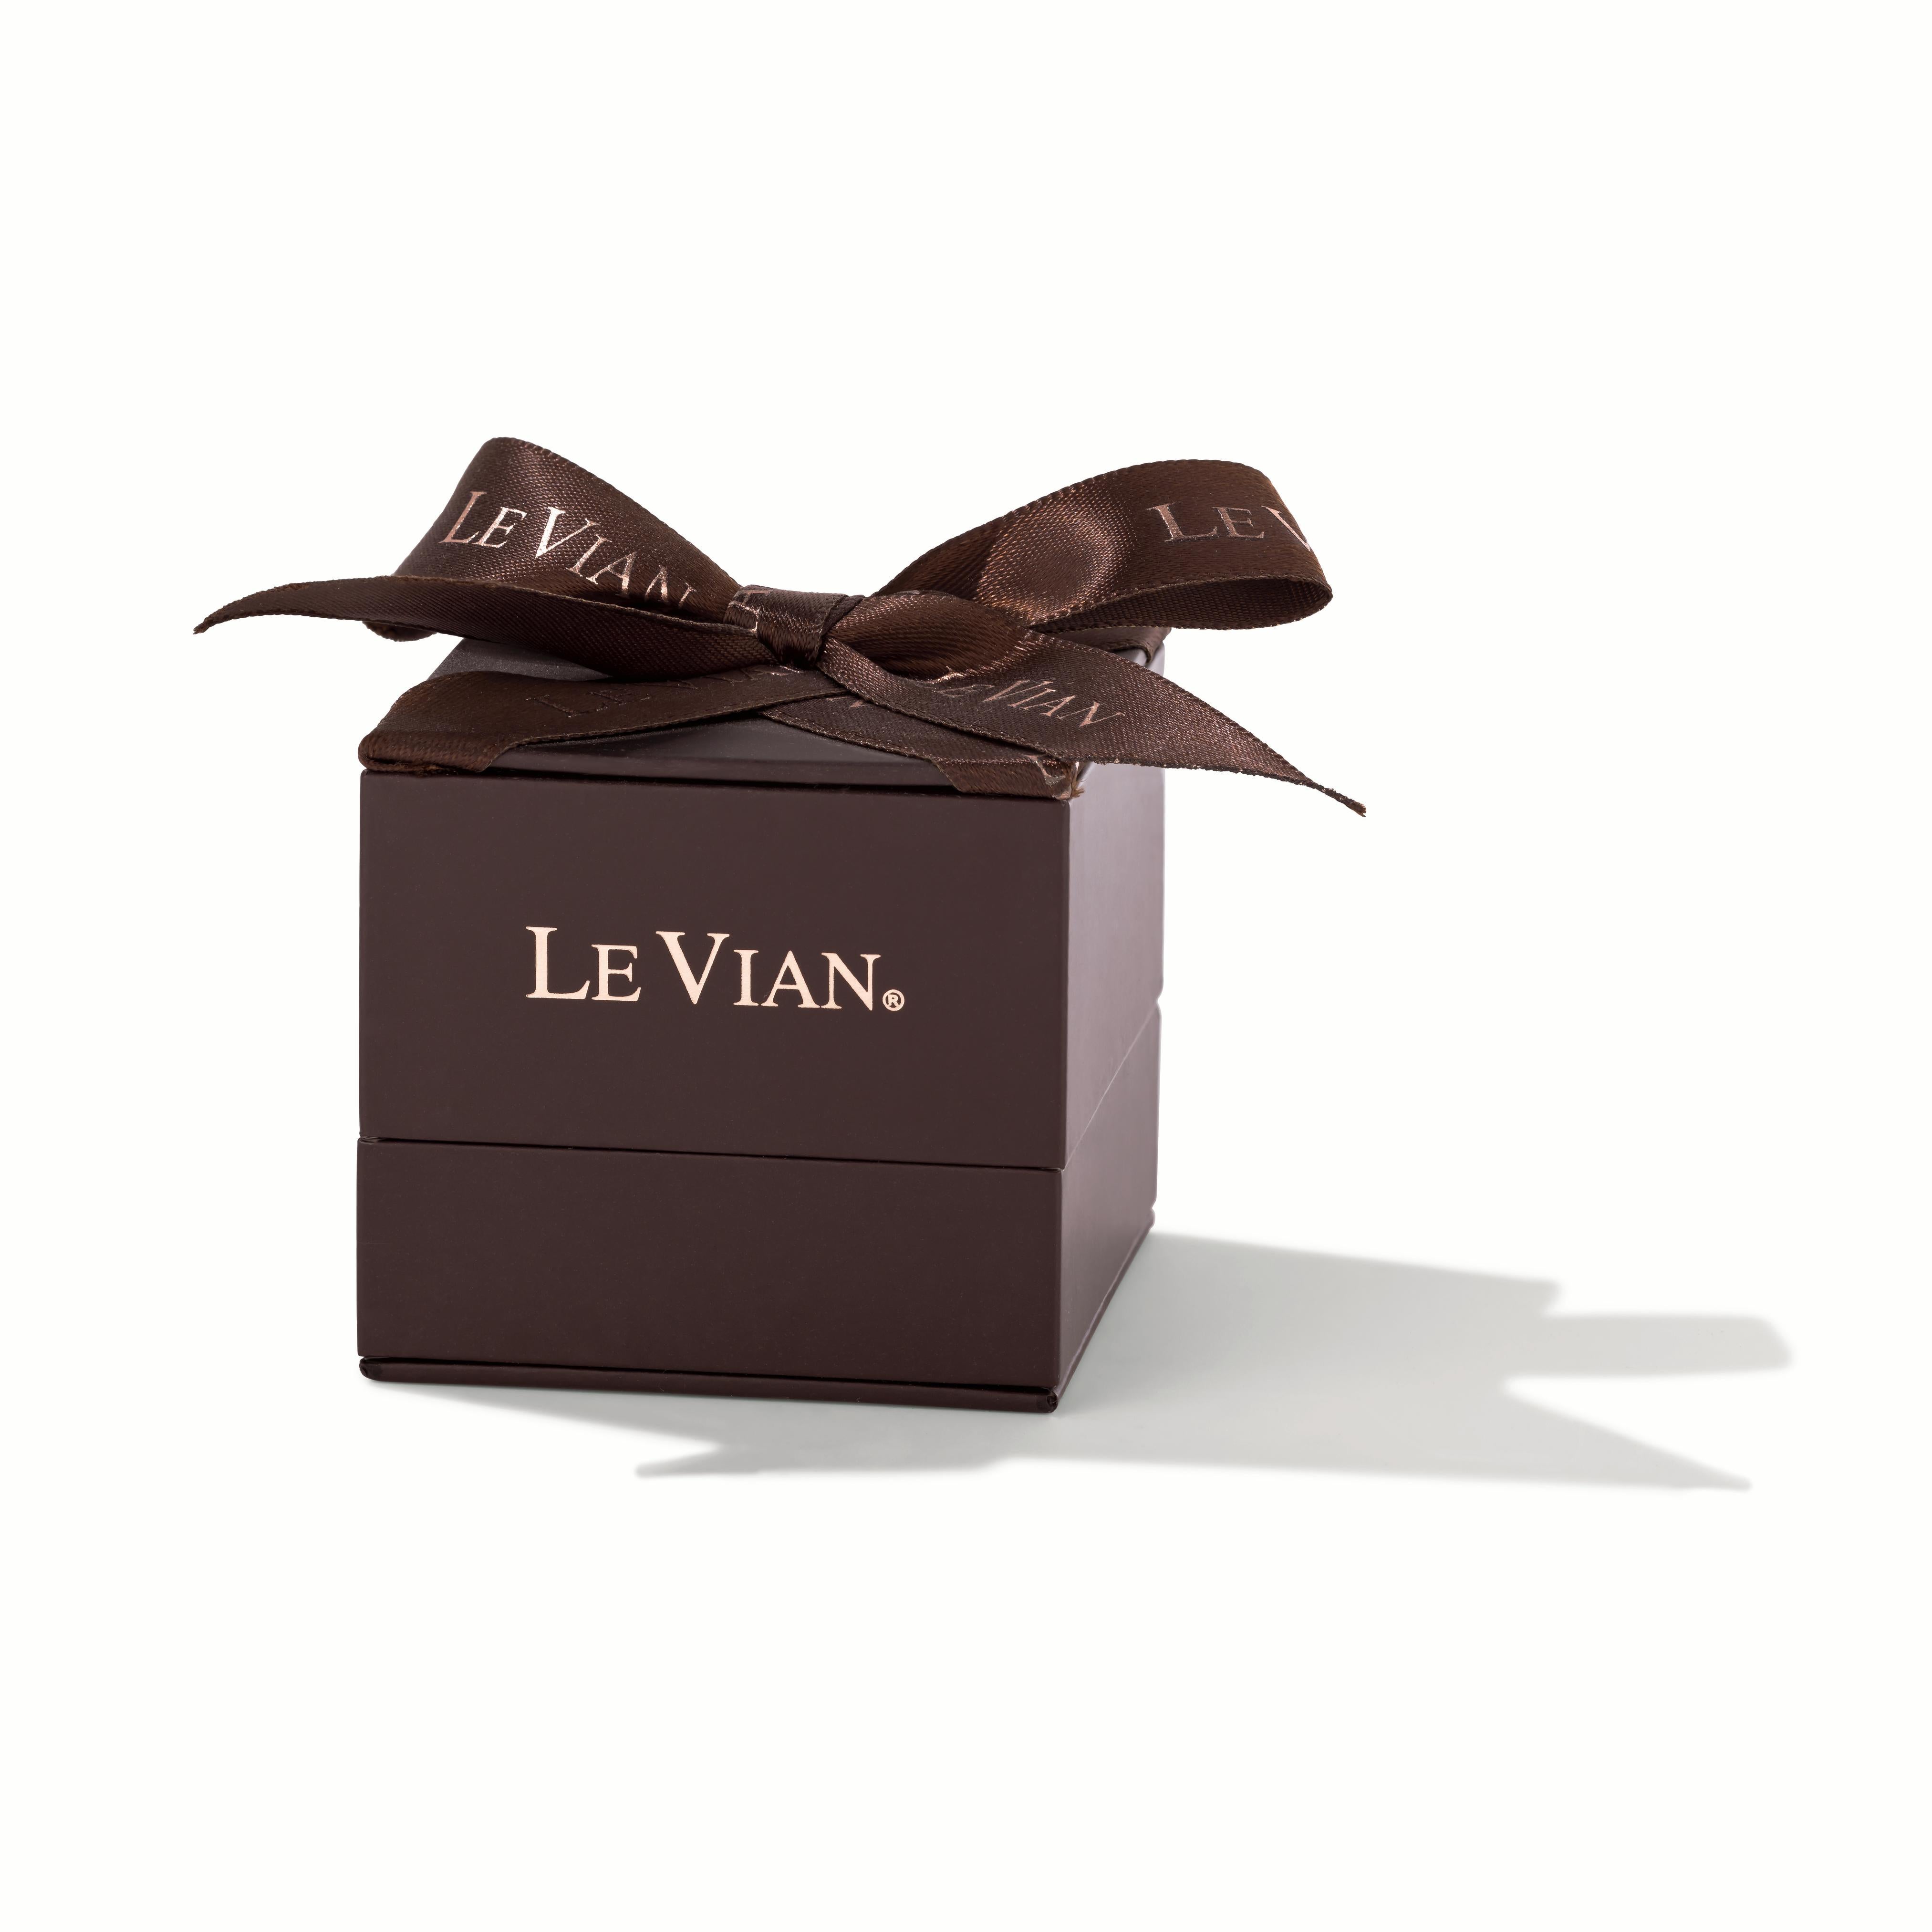 Le Vian® Pendant featuring 1.00 cts Passion Ruby™, .11 cts Vanilla Diamonds® set in 14K Vanilla Gold®

Diamonds Breakdown:
.11 cts White Diamonds

Gems Breakdown:
1.00 cts Ruby

Please feel free to reach out with any questions!

Item comes with a Le